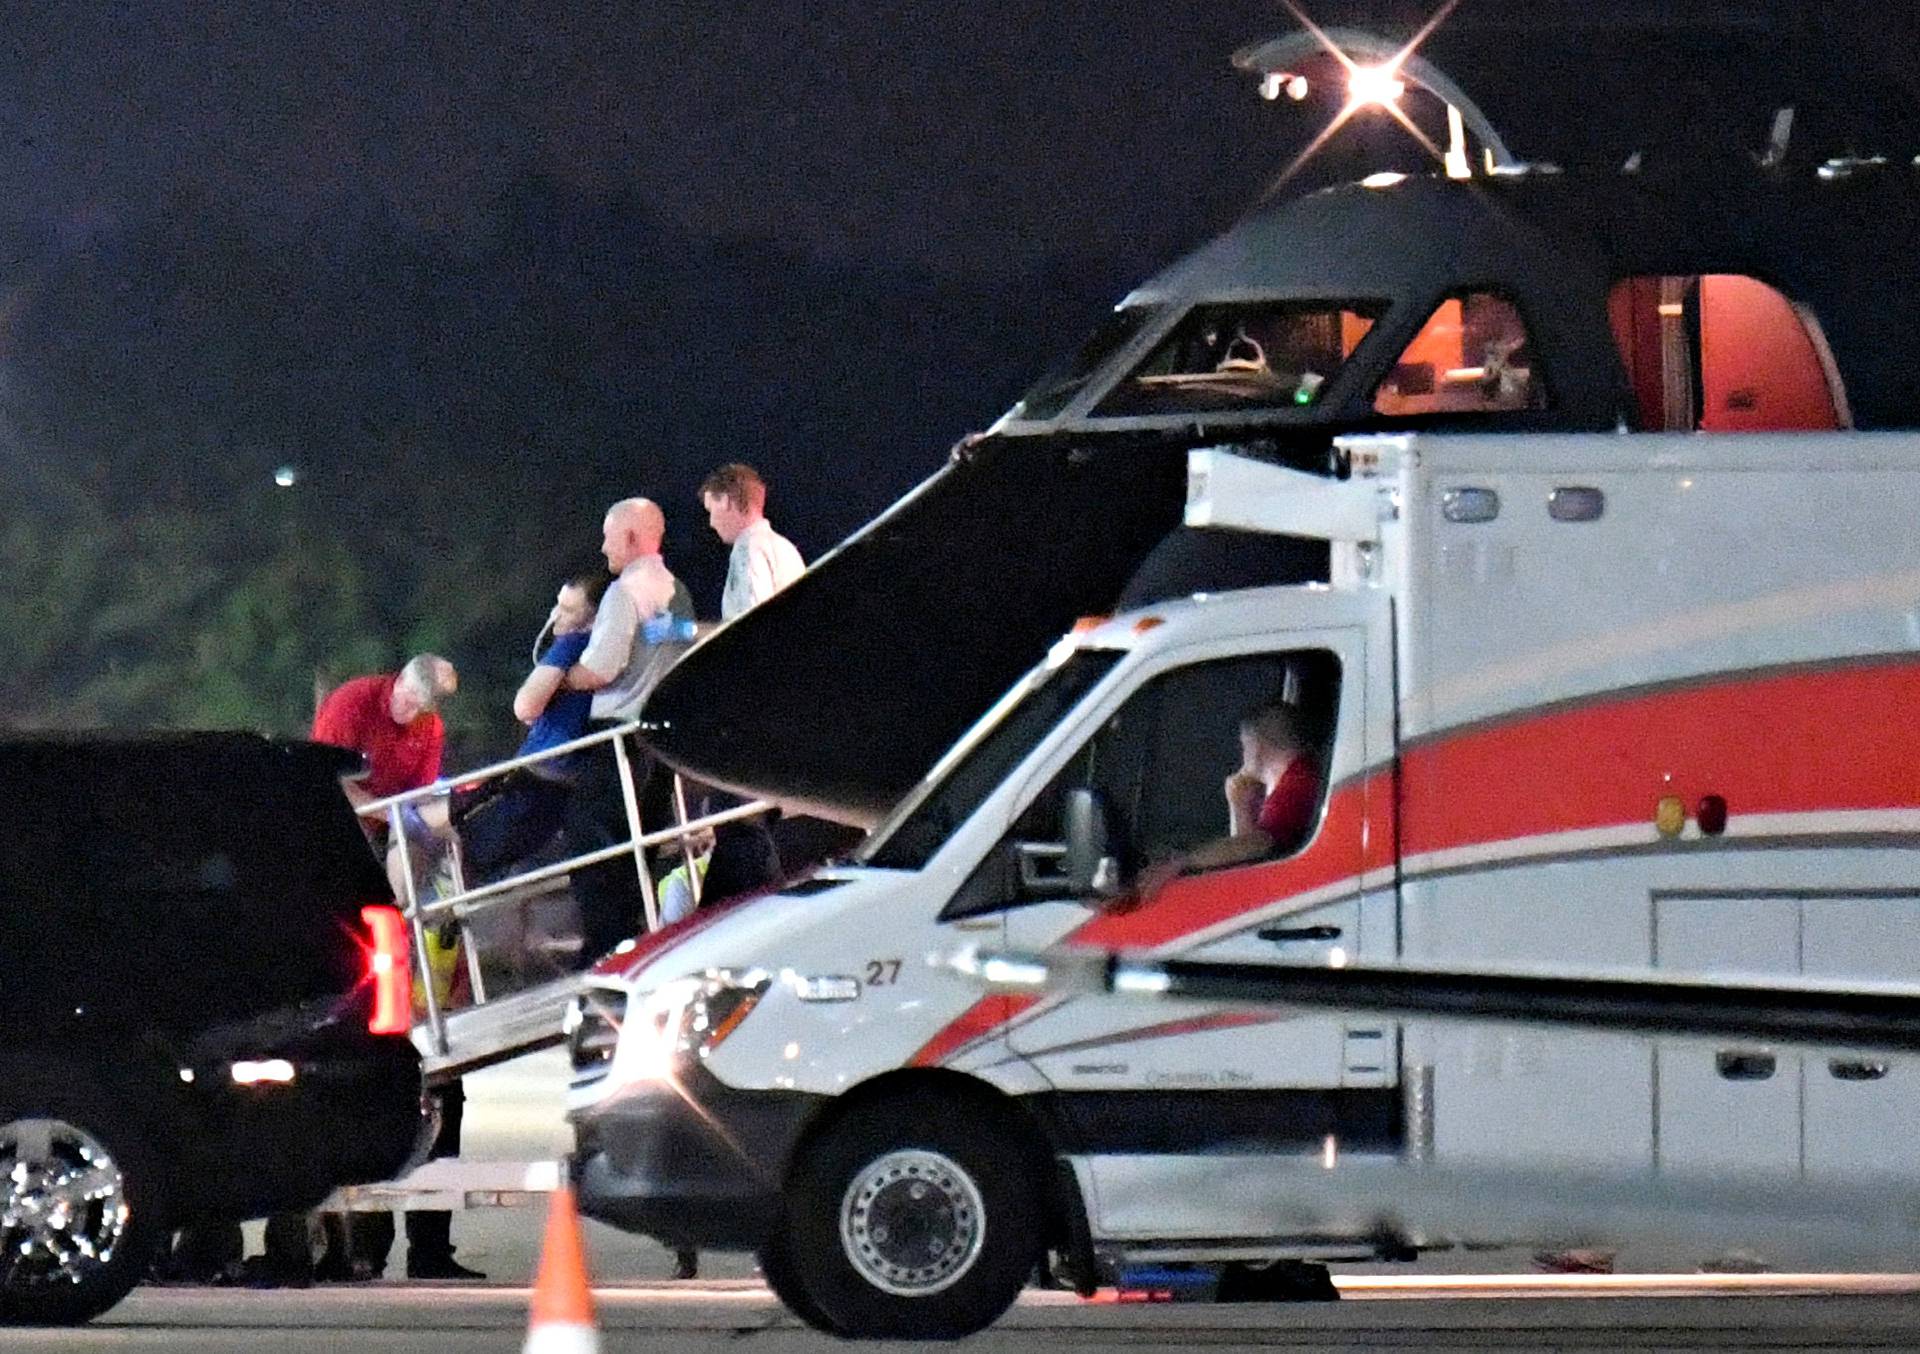 FILE PHOTO: A person believed to be Otto Warmbier is transferred from a medical transport airplane to an awaiting ambulance at Lunken Airport in Cincinnati